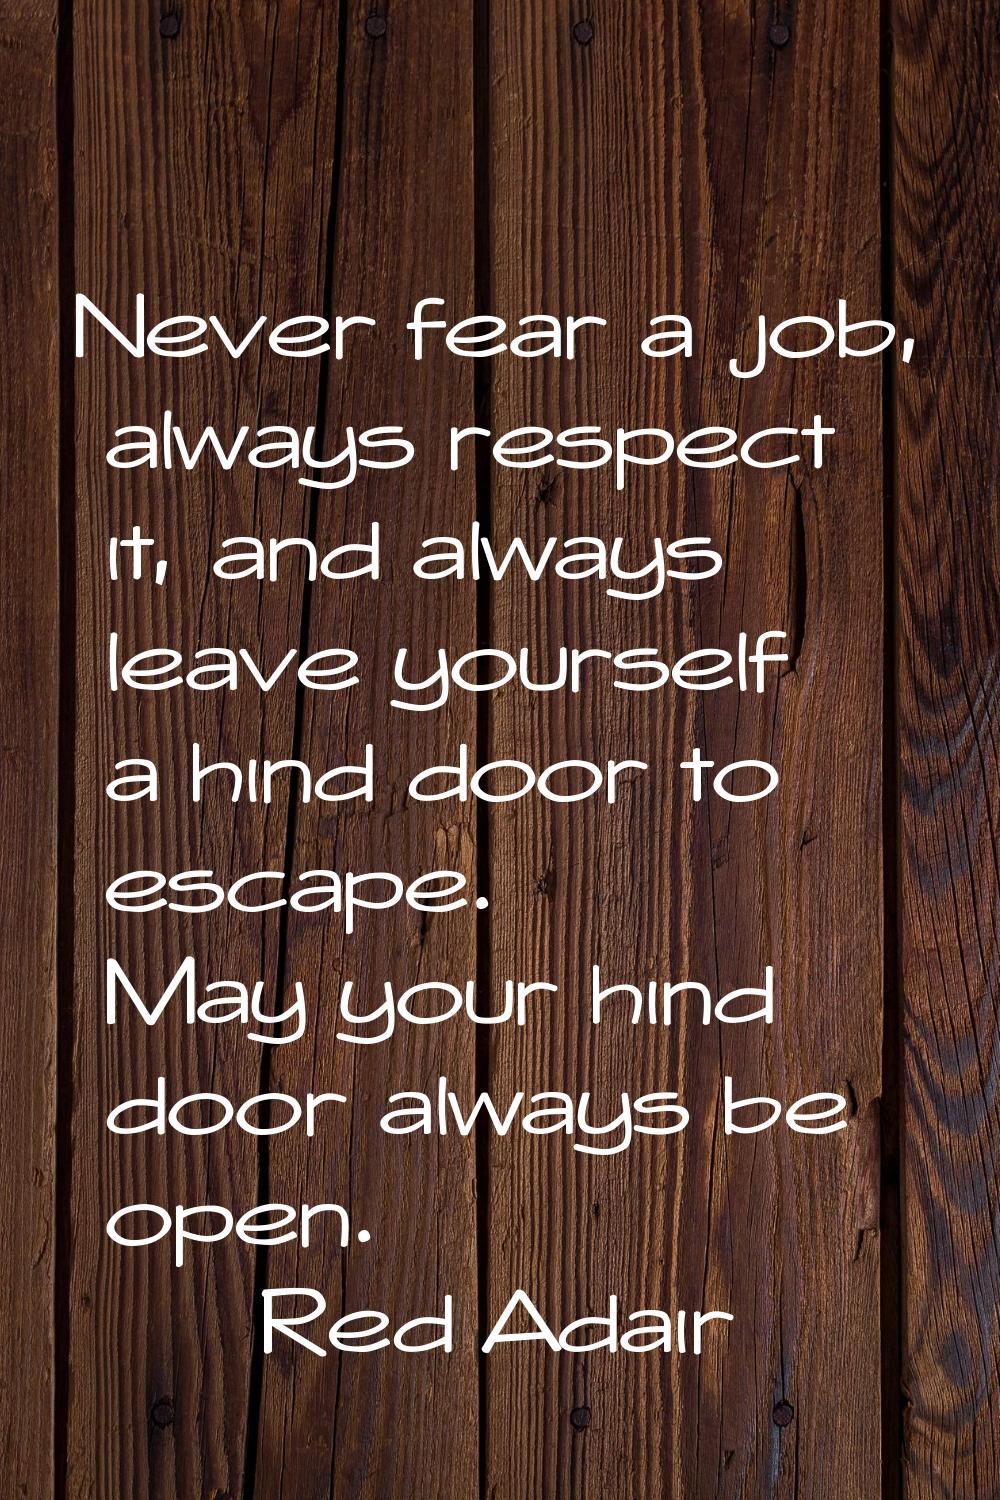 Never fear a job, always respect it, and always leave yourself a hind door to escape. May your hind